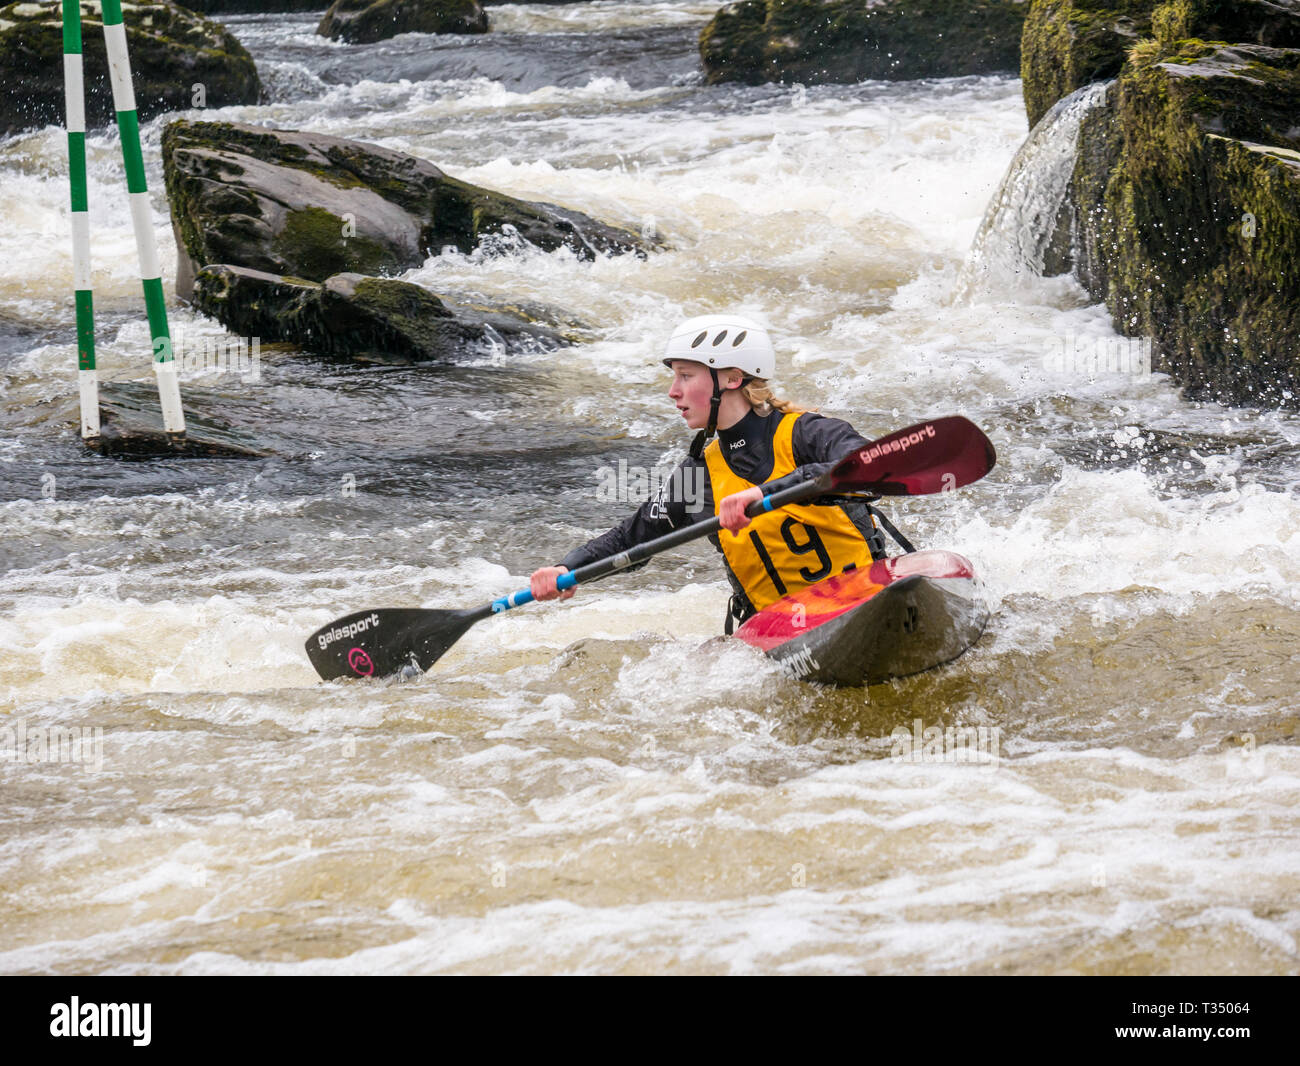 Grandtully, Perthshire, Scotland, United Kingdom, 6 April 2019. Grandtully Premier Canoe Slalom:  Olivia Alderson from Holme Pierrepoint canoe club competes in the women''s premier kayak  on the River Tay Stock Photo